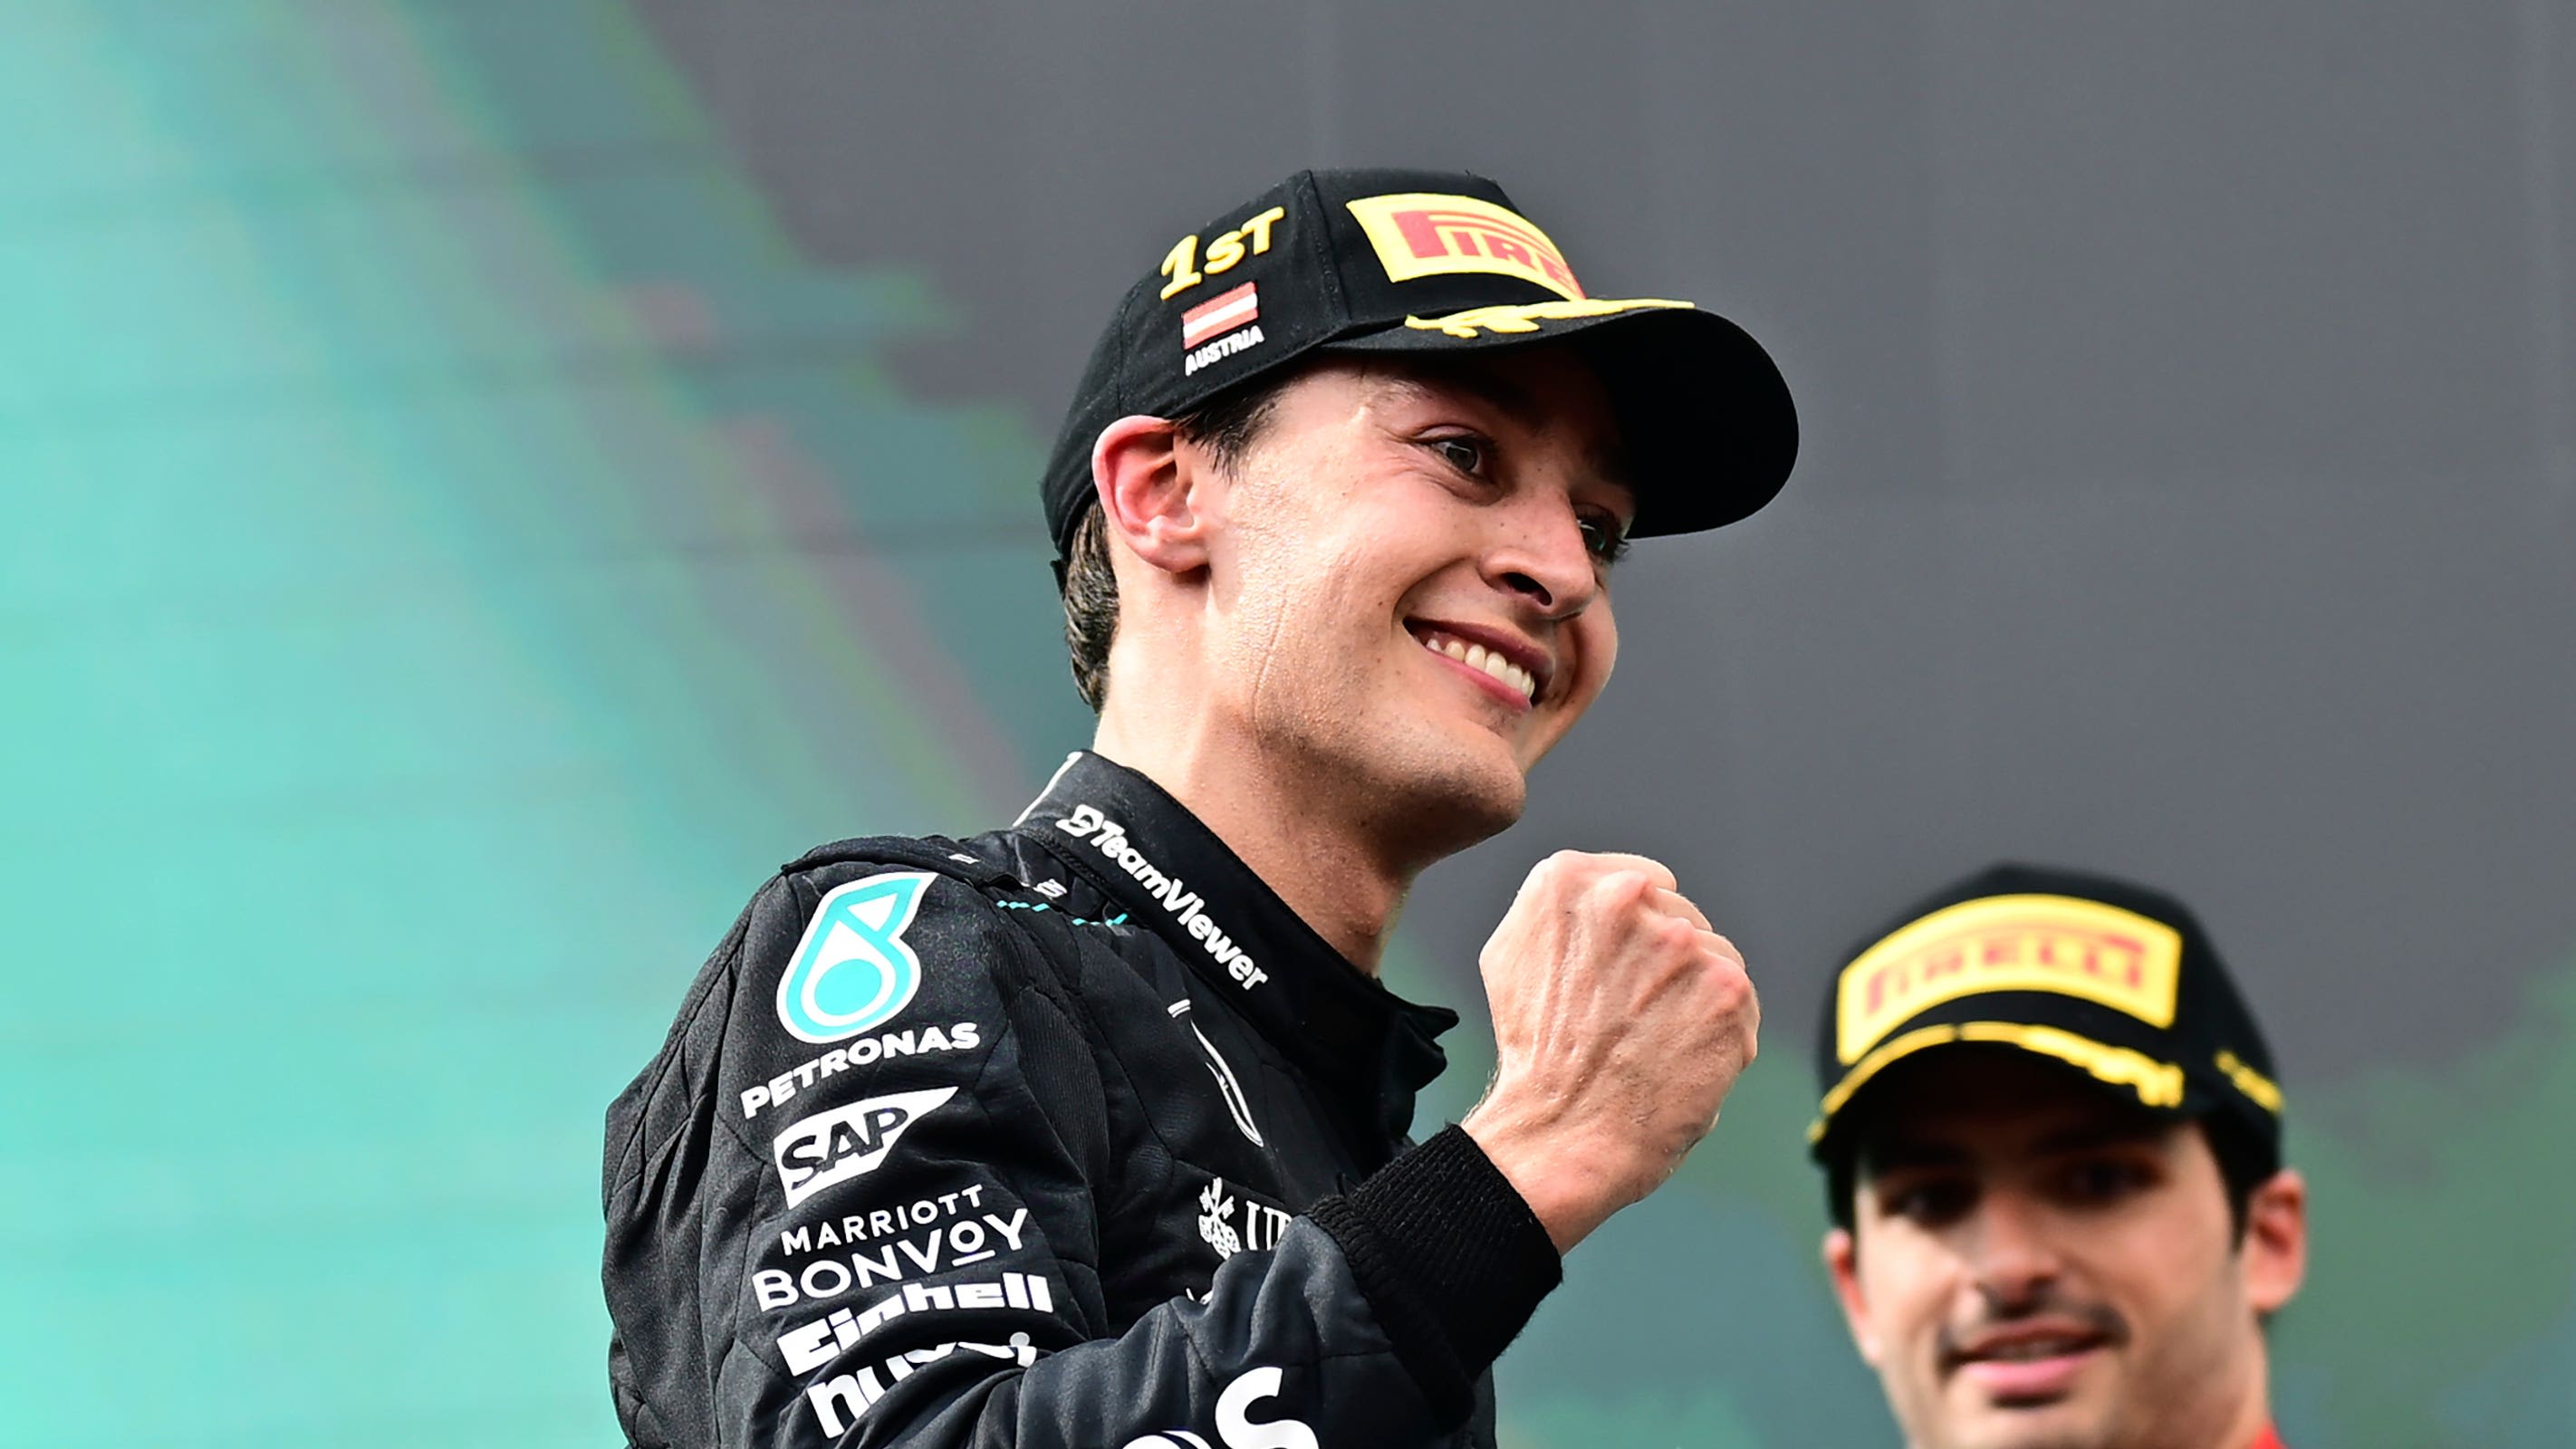 George Russell wins in Austria after Max Verstappen and Lando Norris collide